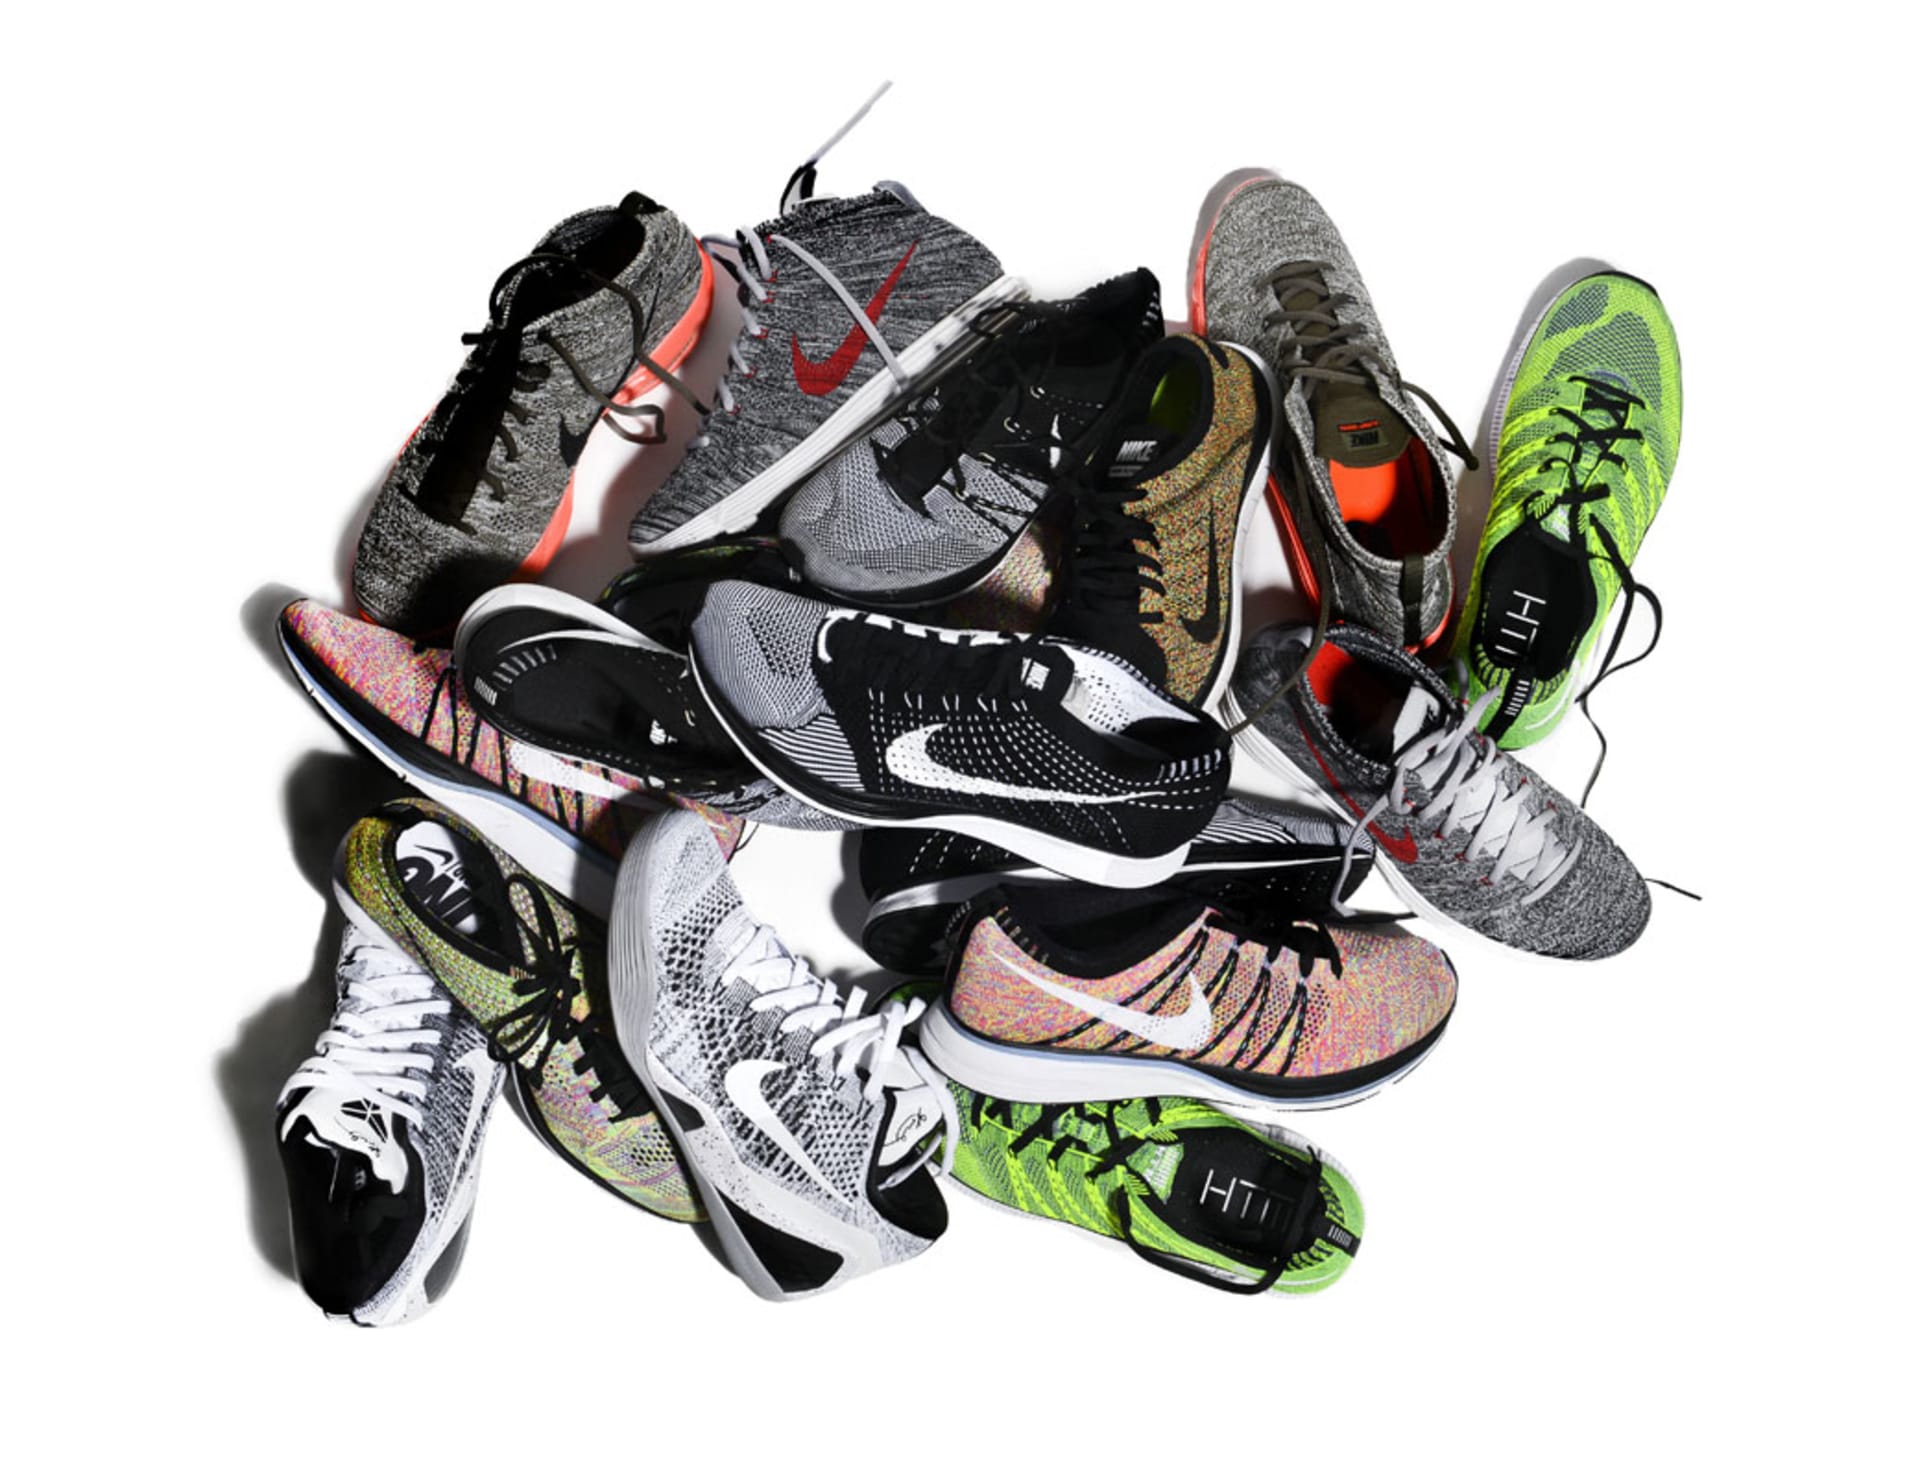 Nike Flyknit Is the Most Stylish and Innovative Sneaker Technology ...